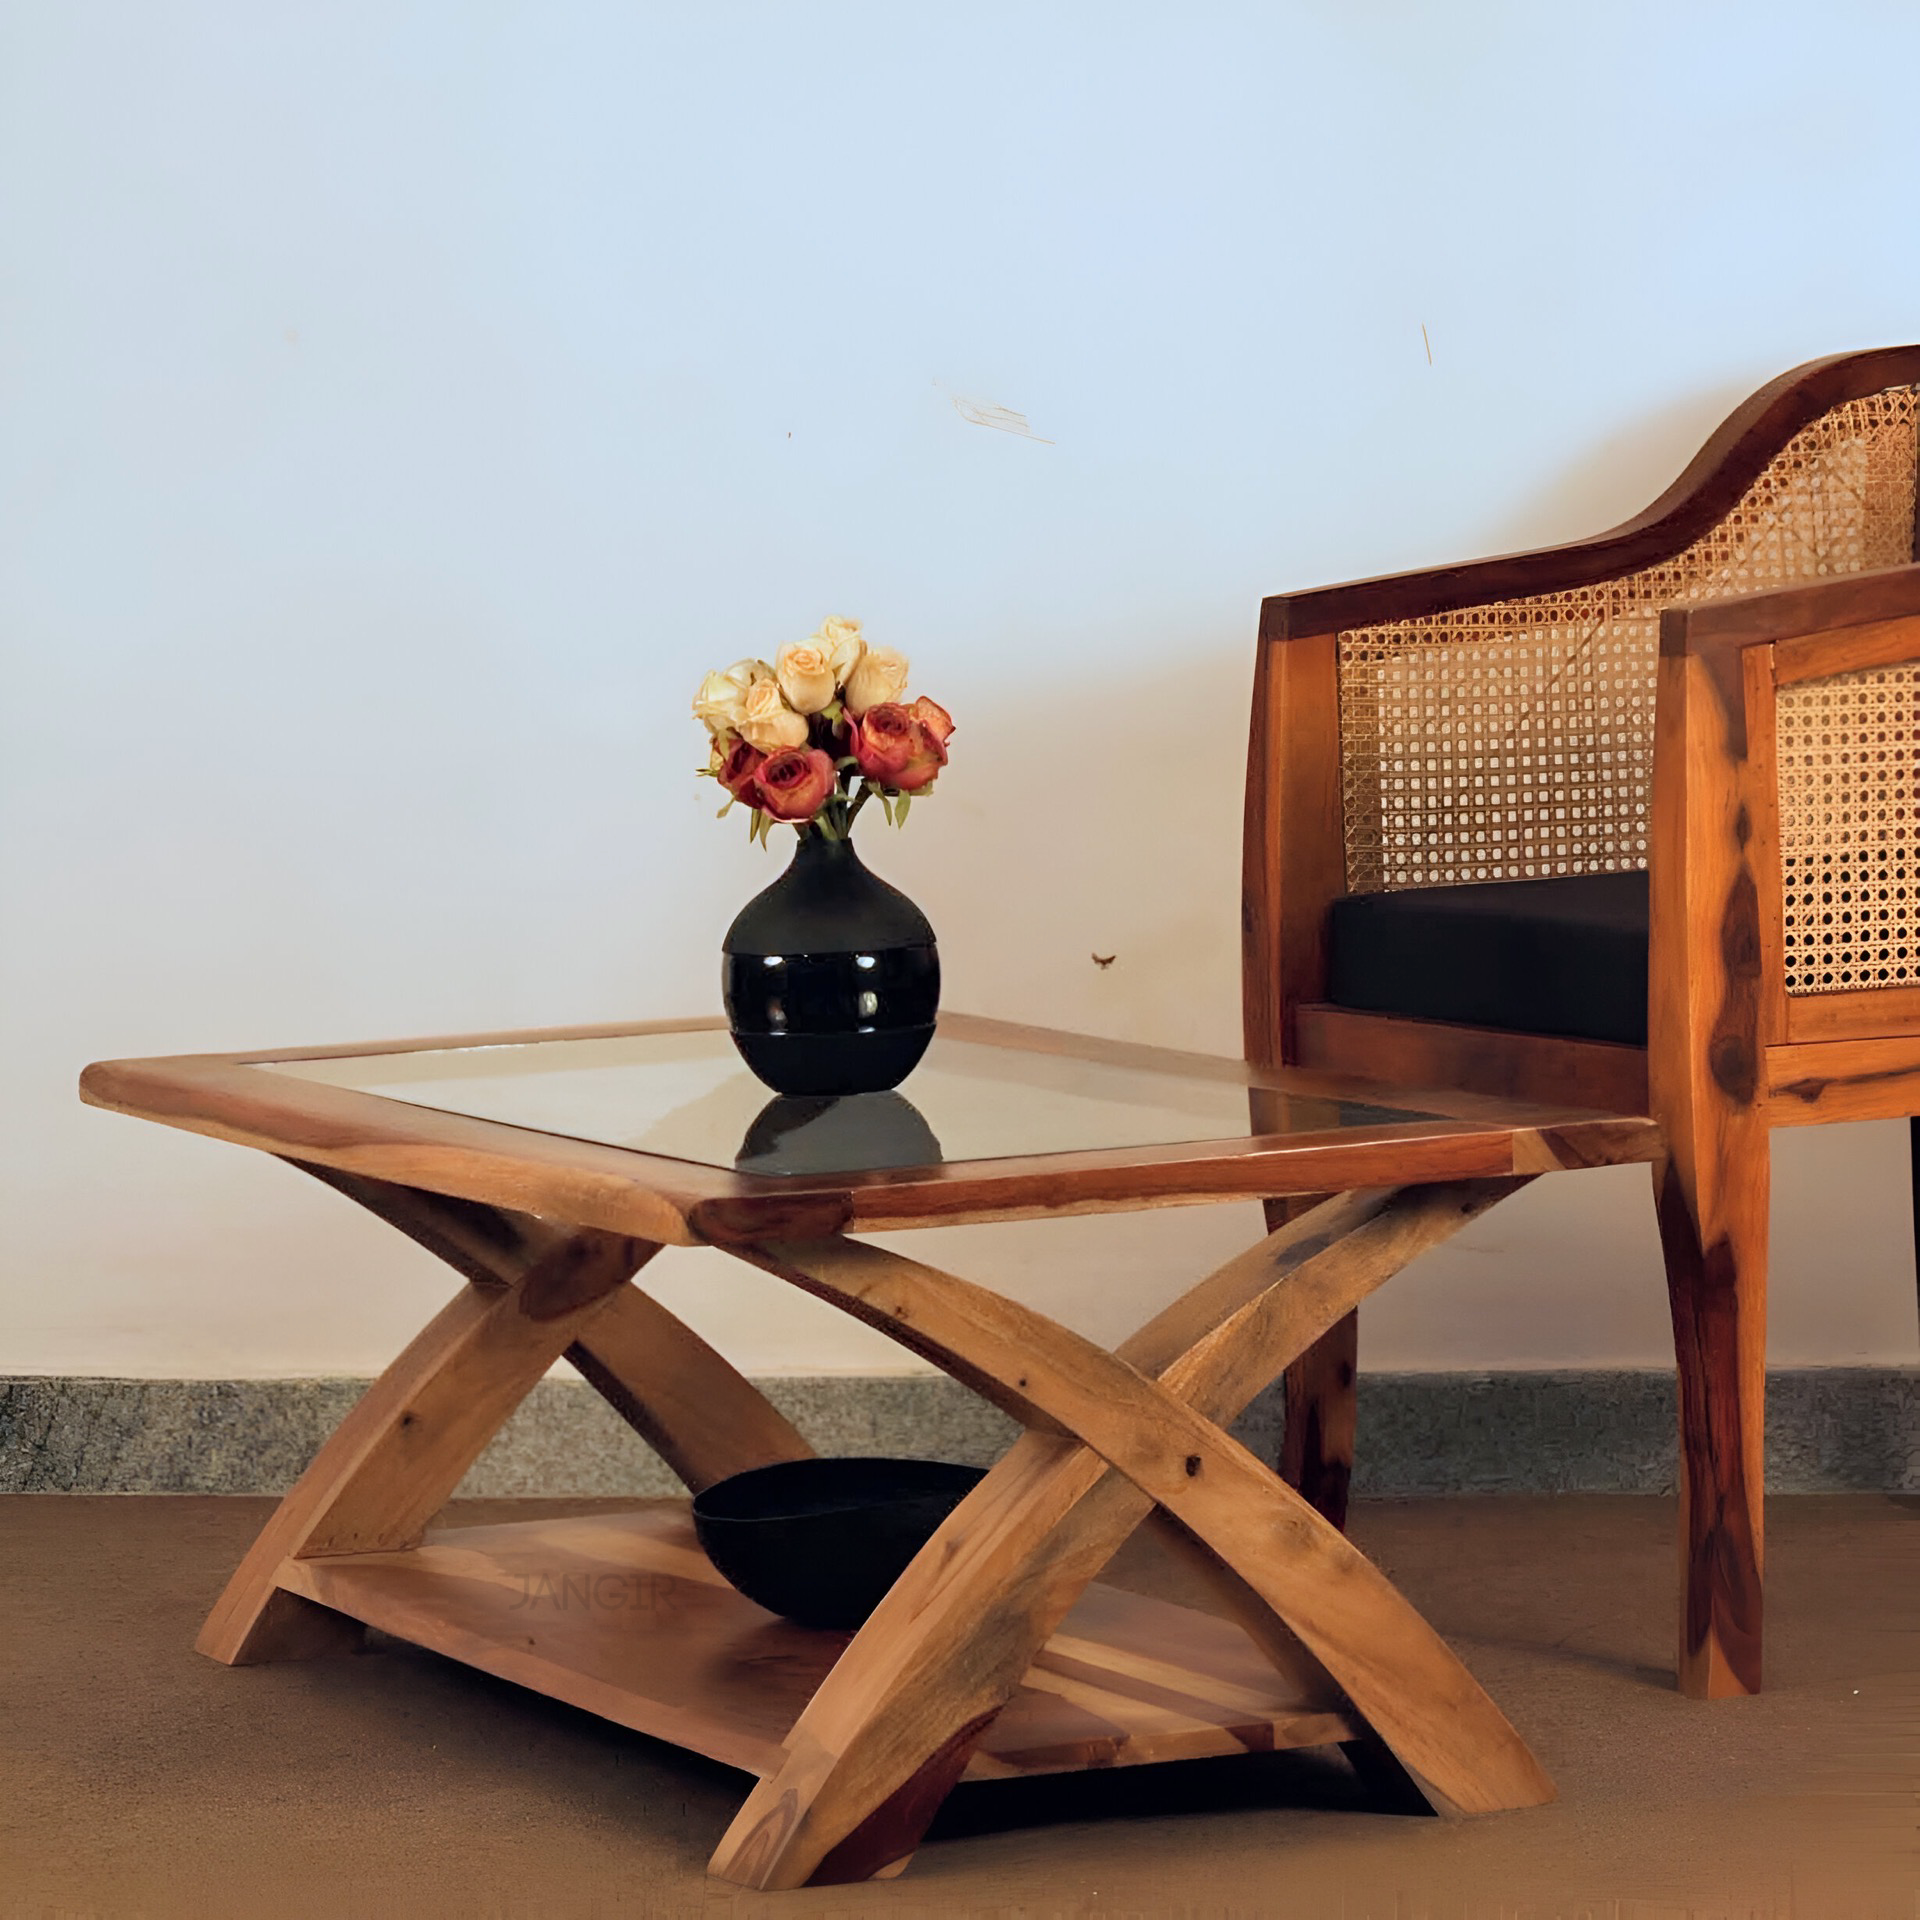 Transform your living room with our designer coffee table with open storage and a glass top. Made with sheesham wood. Elevate your home decor with our   center tables near you in Bangalore, Shop Now